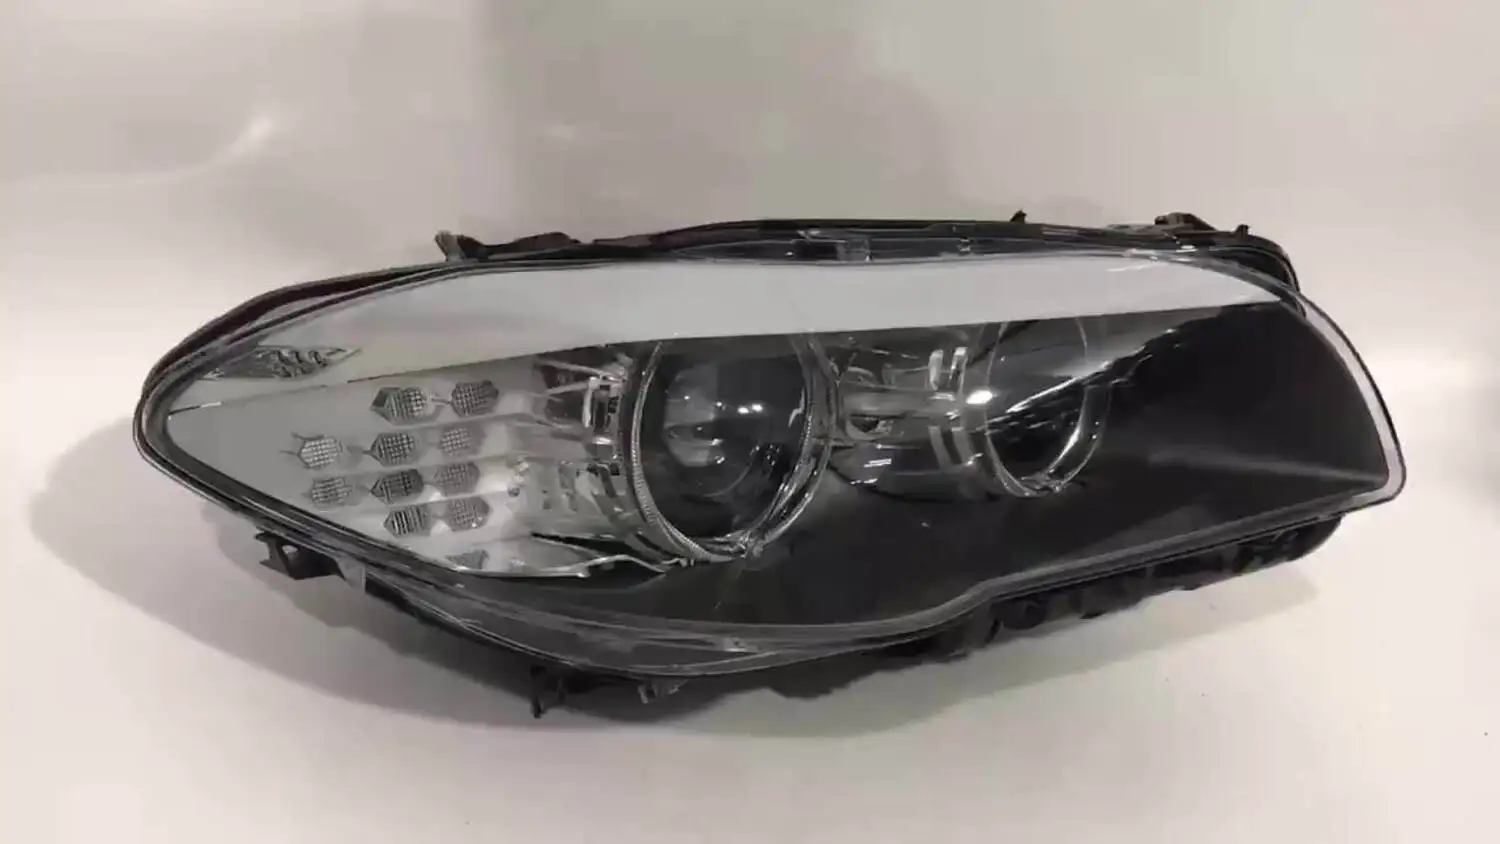 

car xenon for BMW F10 headlamp for car F18 Lci 525i 5 series 2010 ~2013 year front headlight auto lighting systems